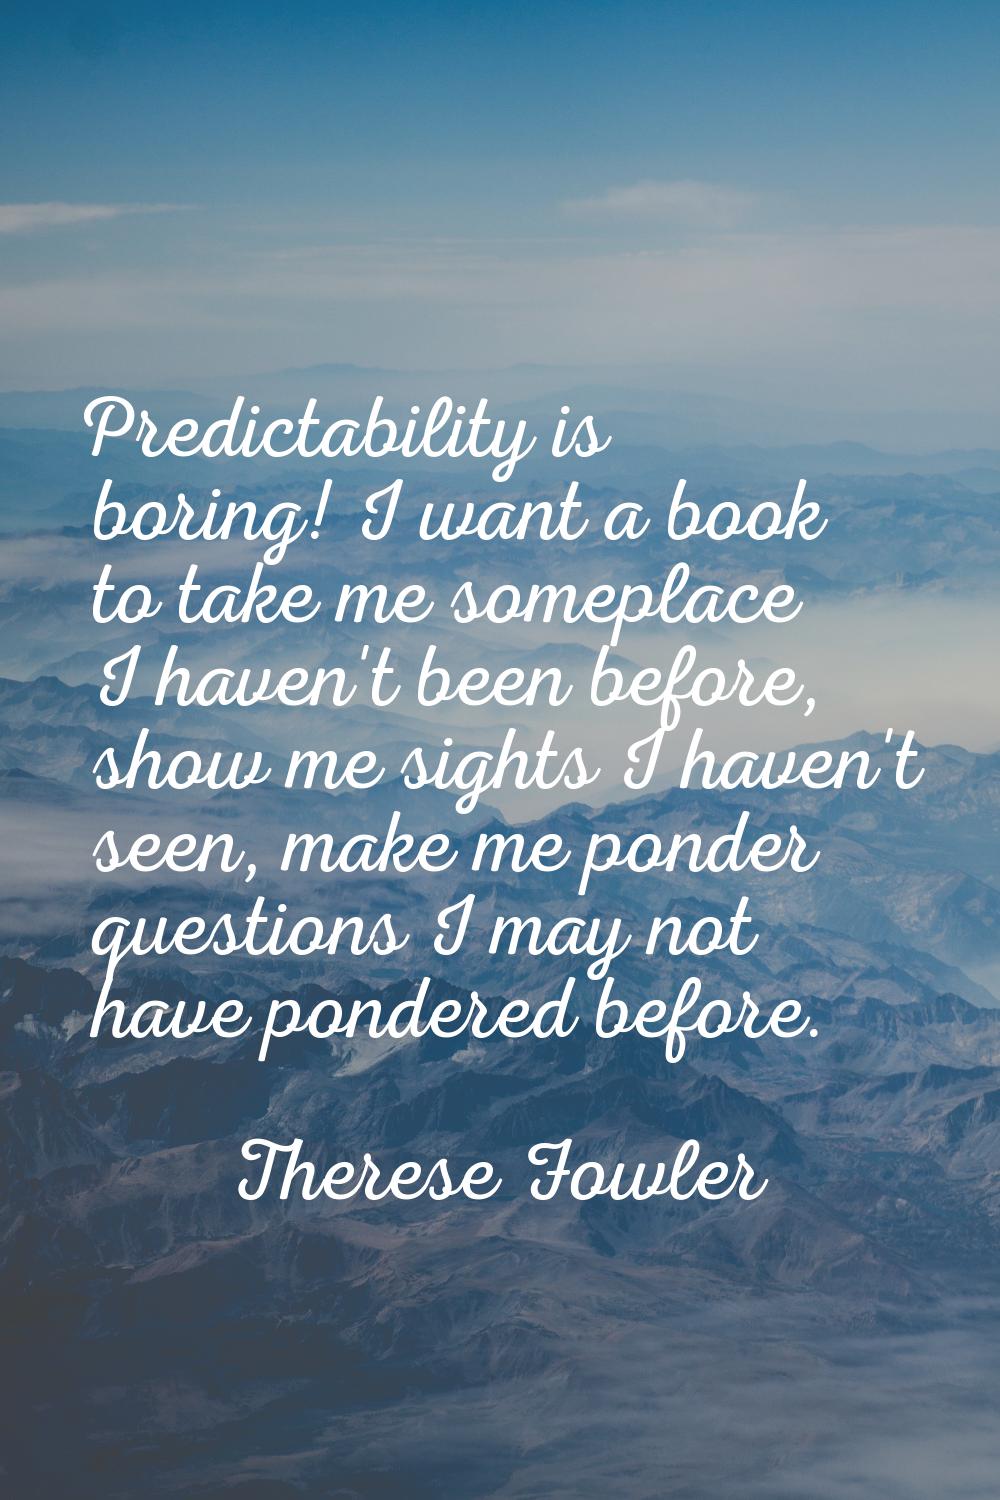 Predictability is boring! I want a book to take me someplace I haven't been before, show me sights 